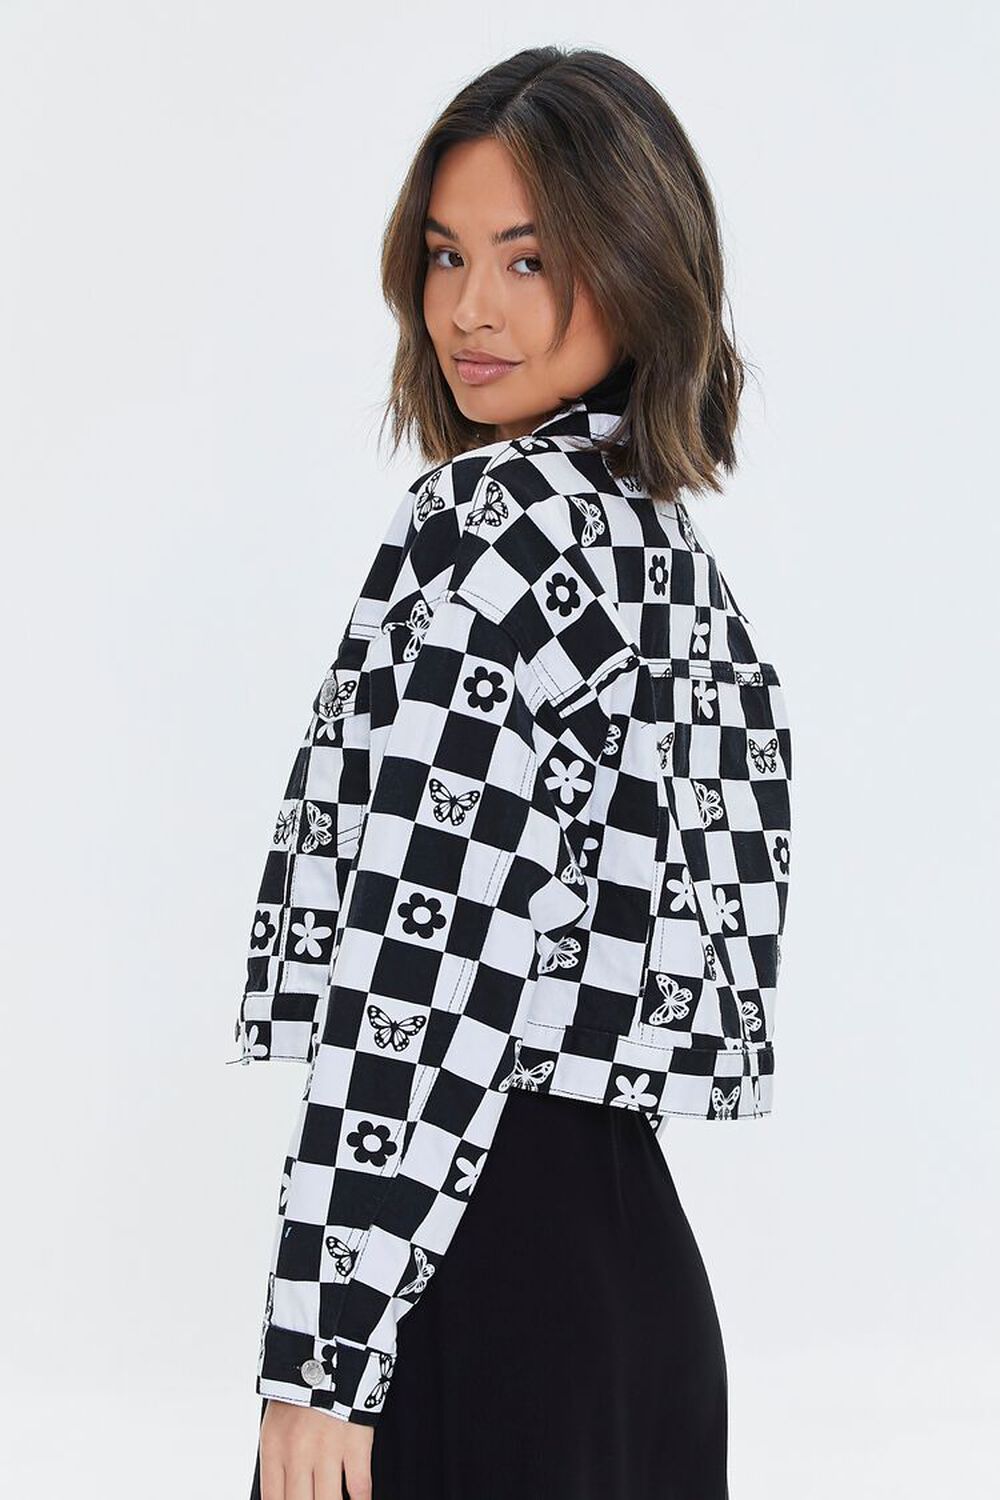 BLACK/WHITE Floral Checkered Twill Jacket, image 2